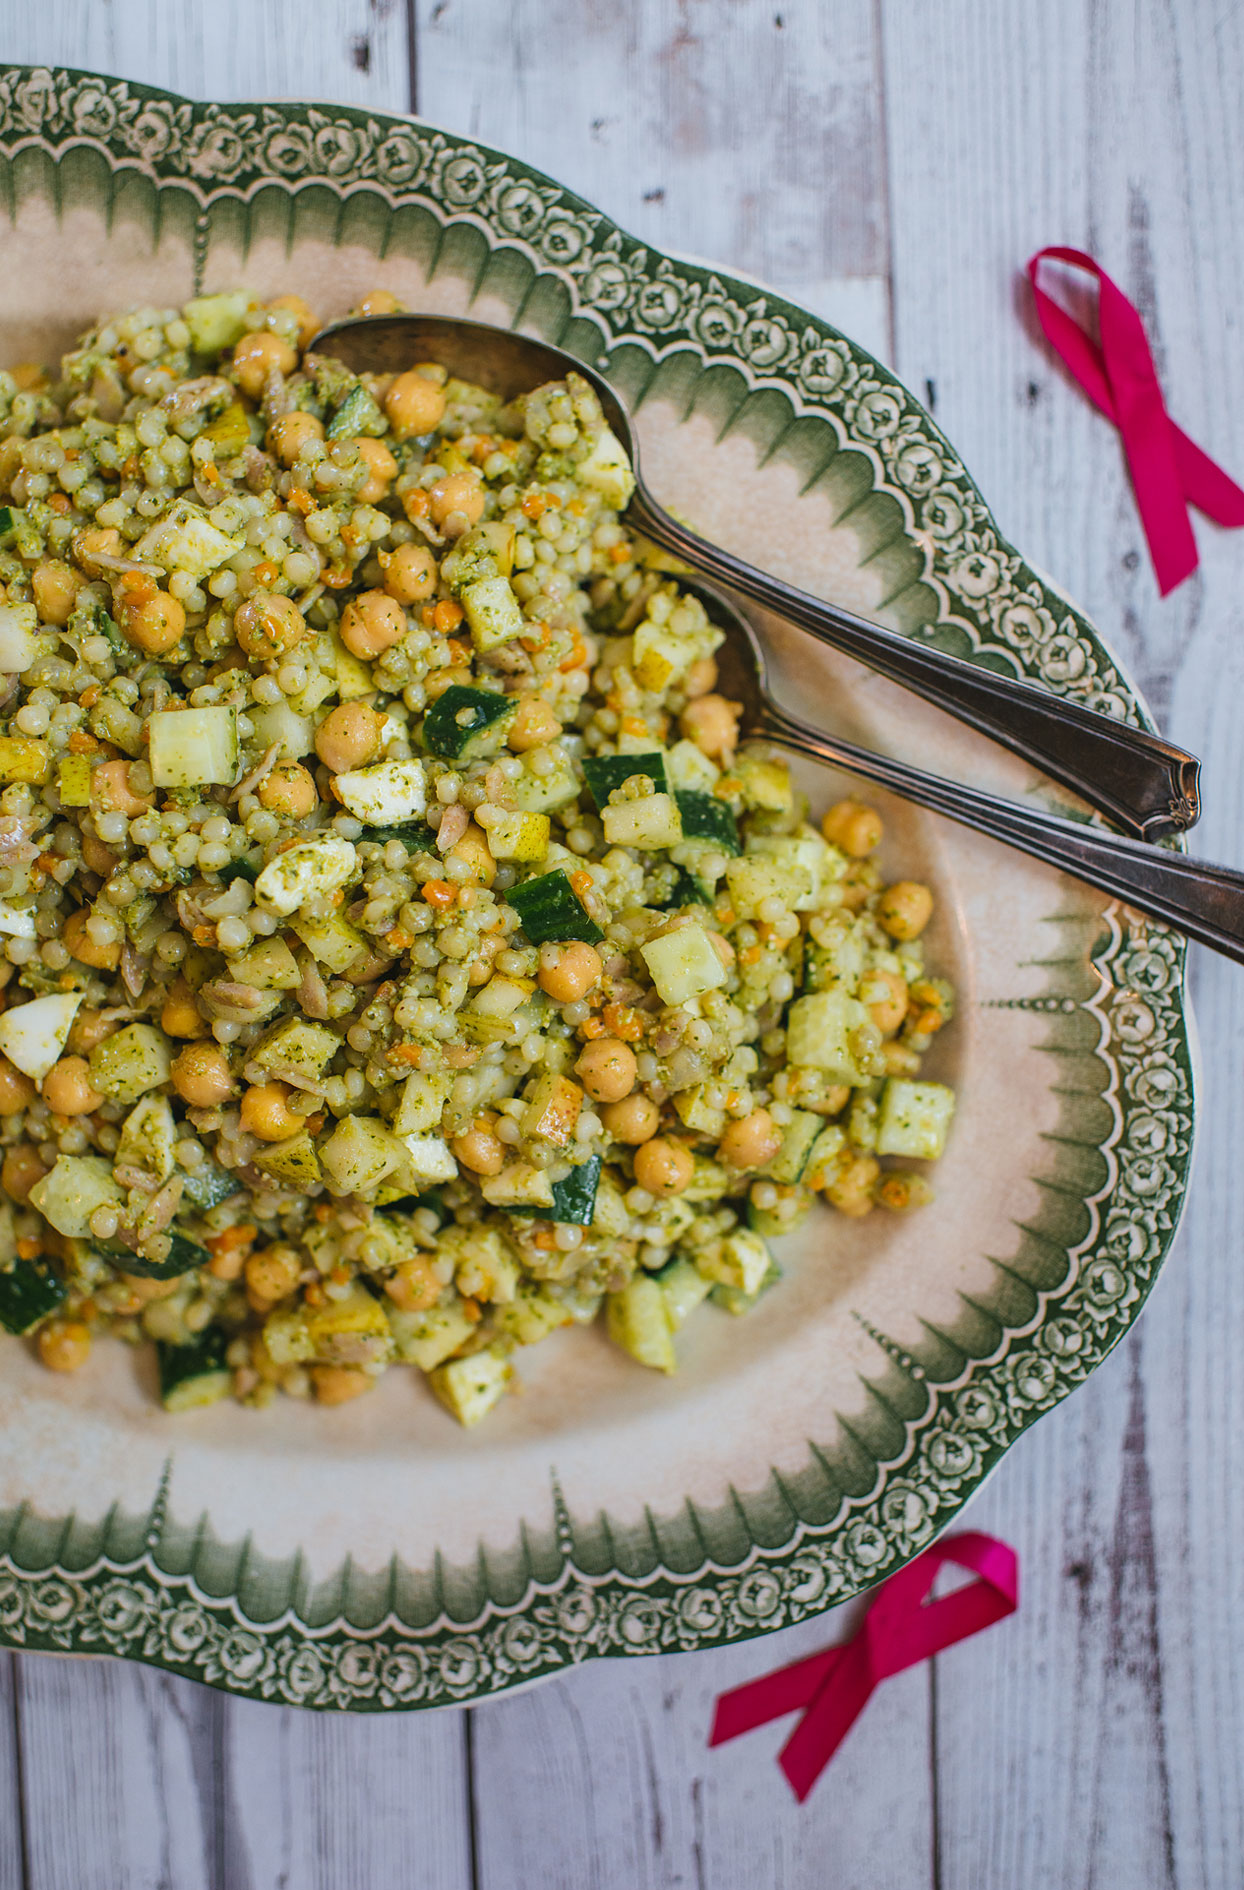 Israeli couscous salad with pear, bocconcini cheese and pesto